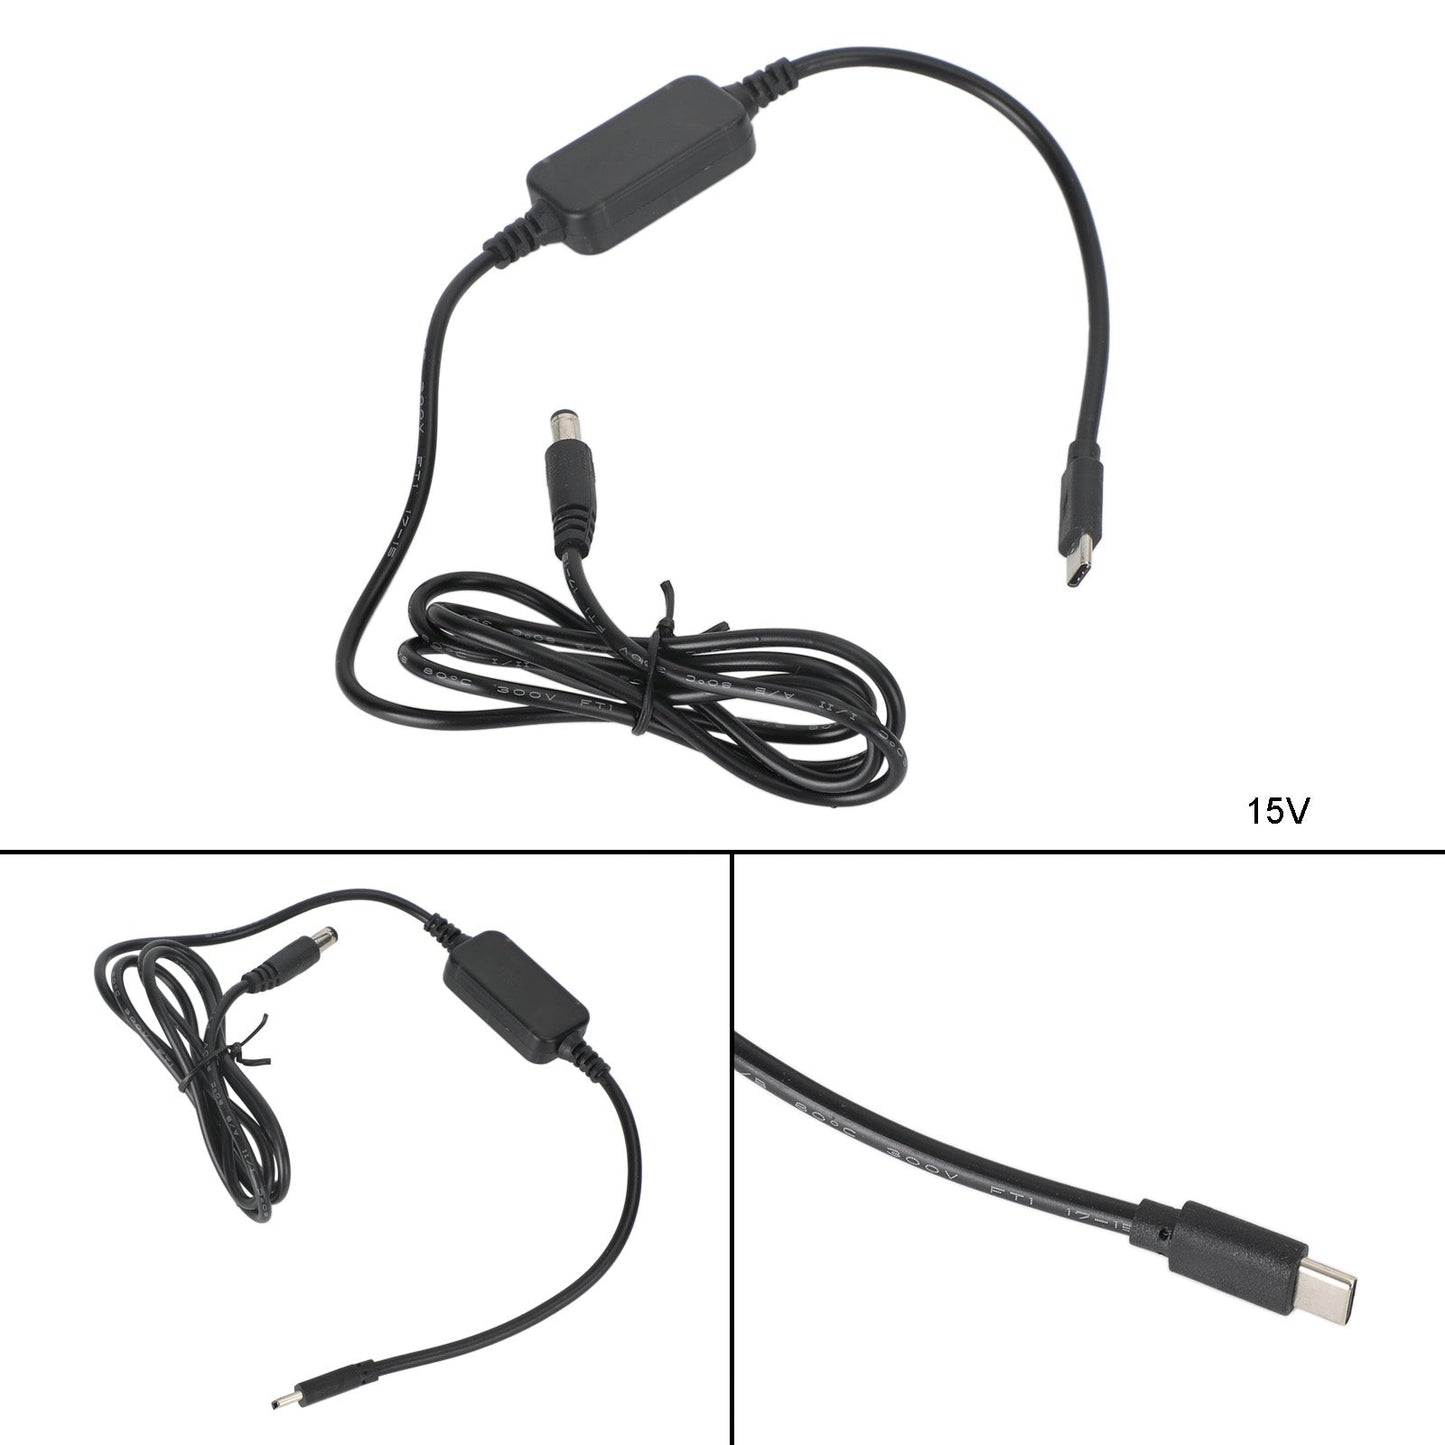 USB Type-C to 12V DC 5.5mm*2.5mm Adapter Cable 1m 39.37inches PD Charger Cord